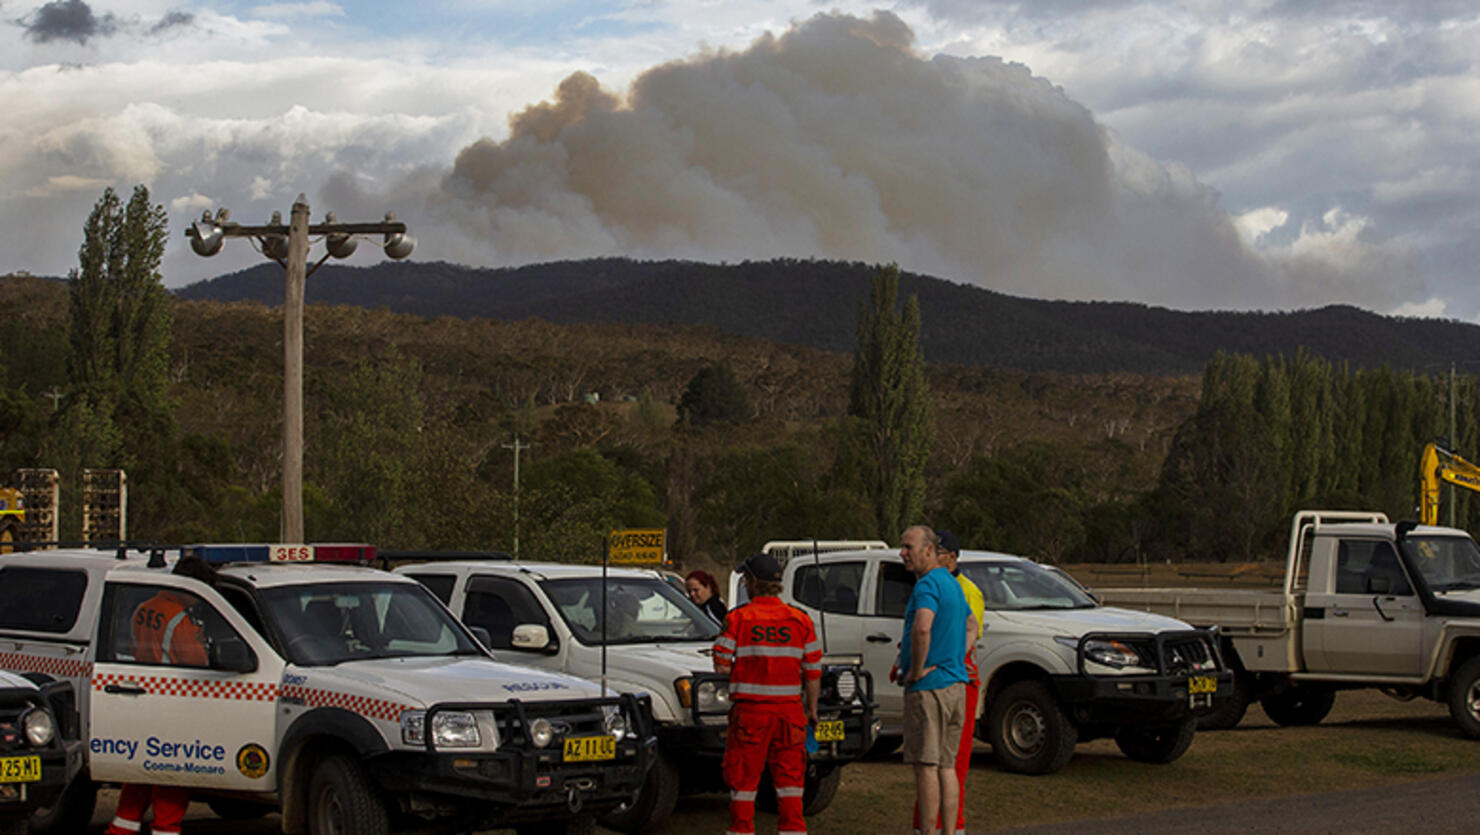 Three Dead After Air Tanker Crashes Fighting Fires Near Snowy Mountains